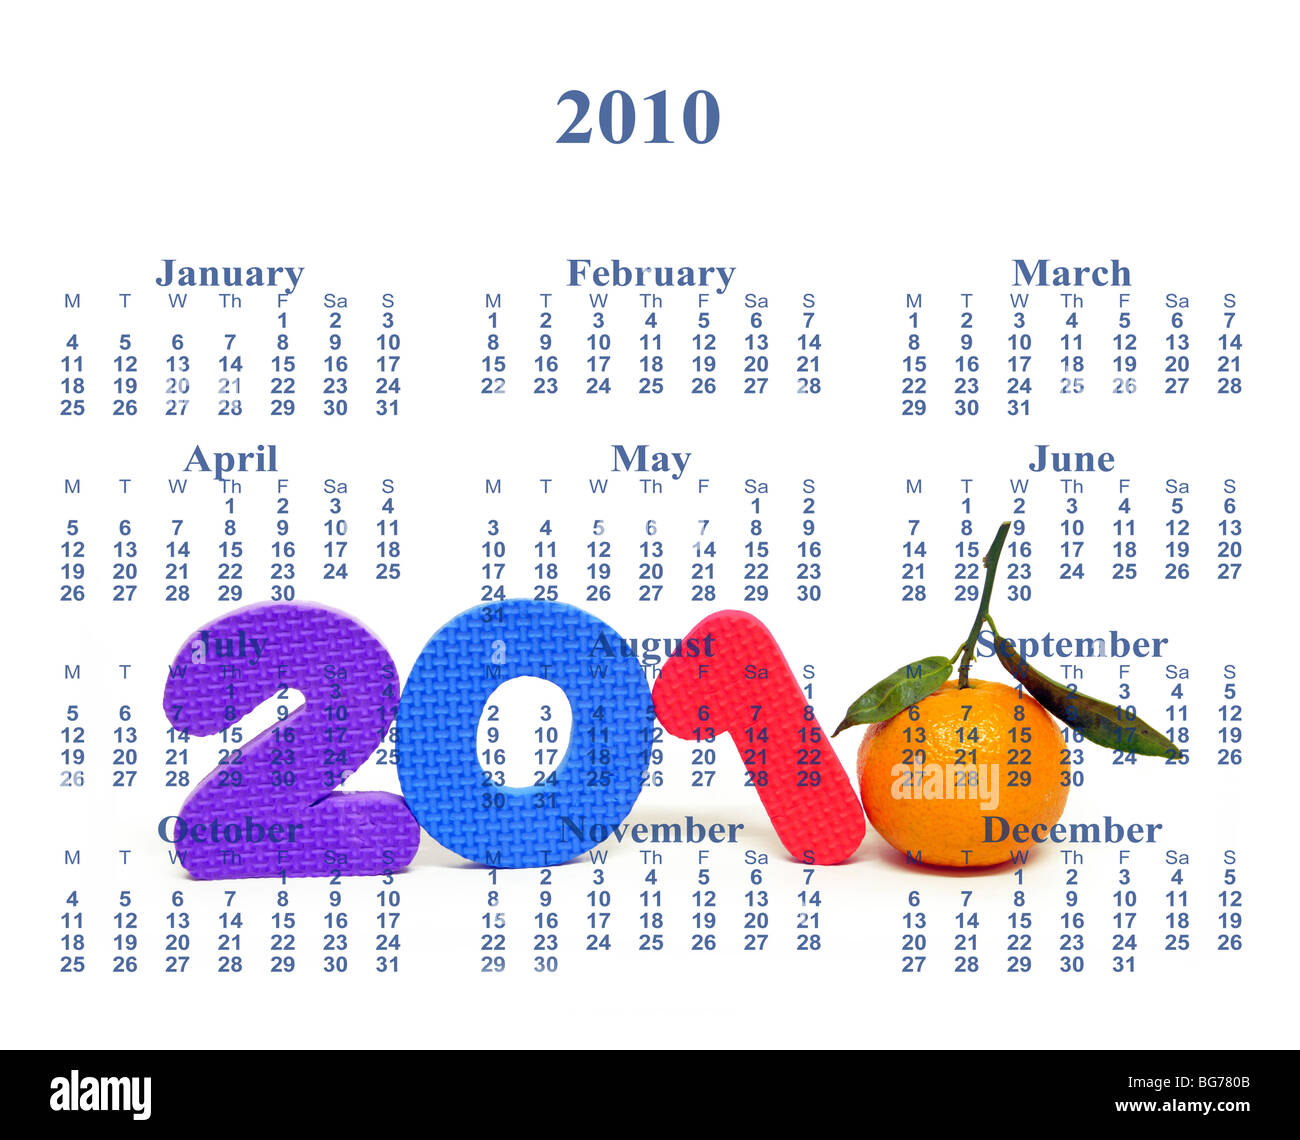 Still life of toy numbers and an orange creating the year 2010 with calendar months and dates superimposed on it. Stock Photo